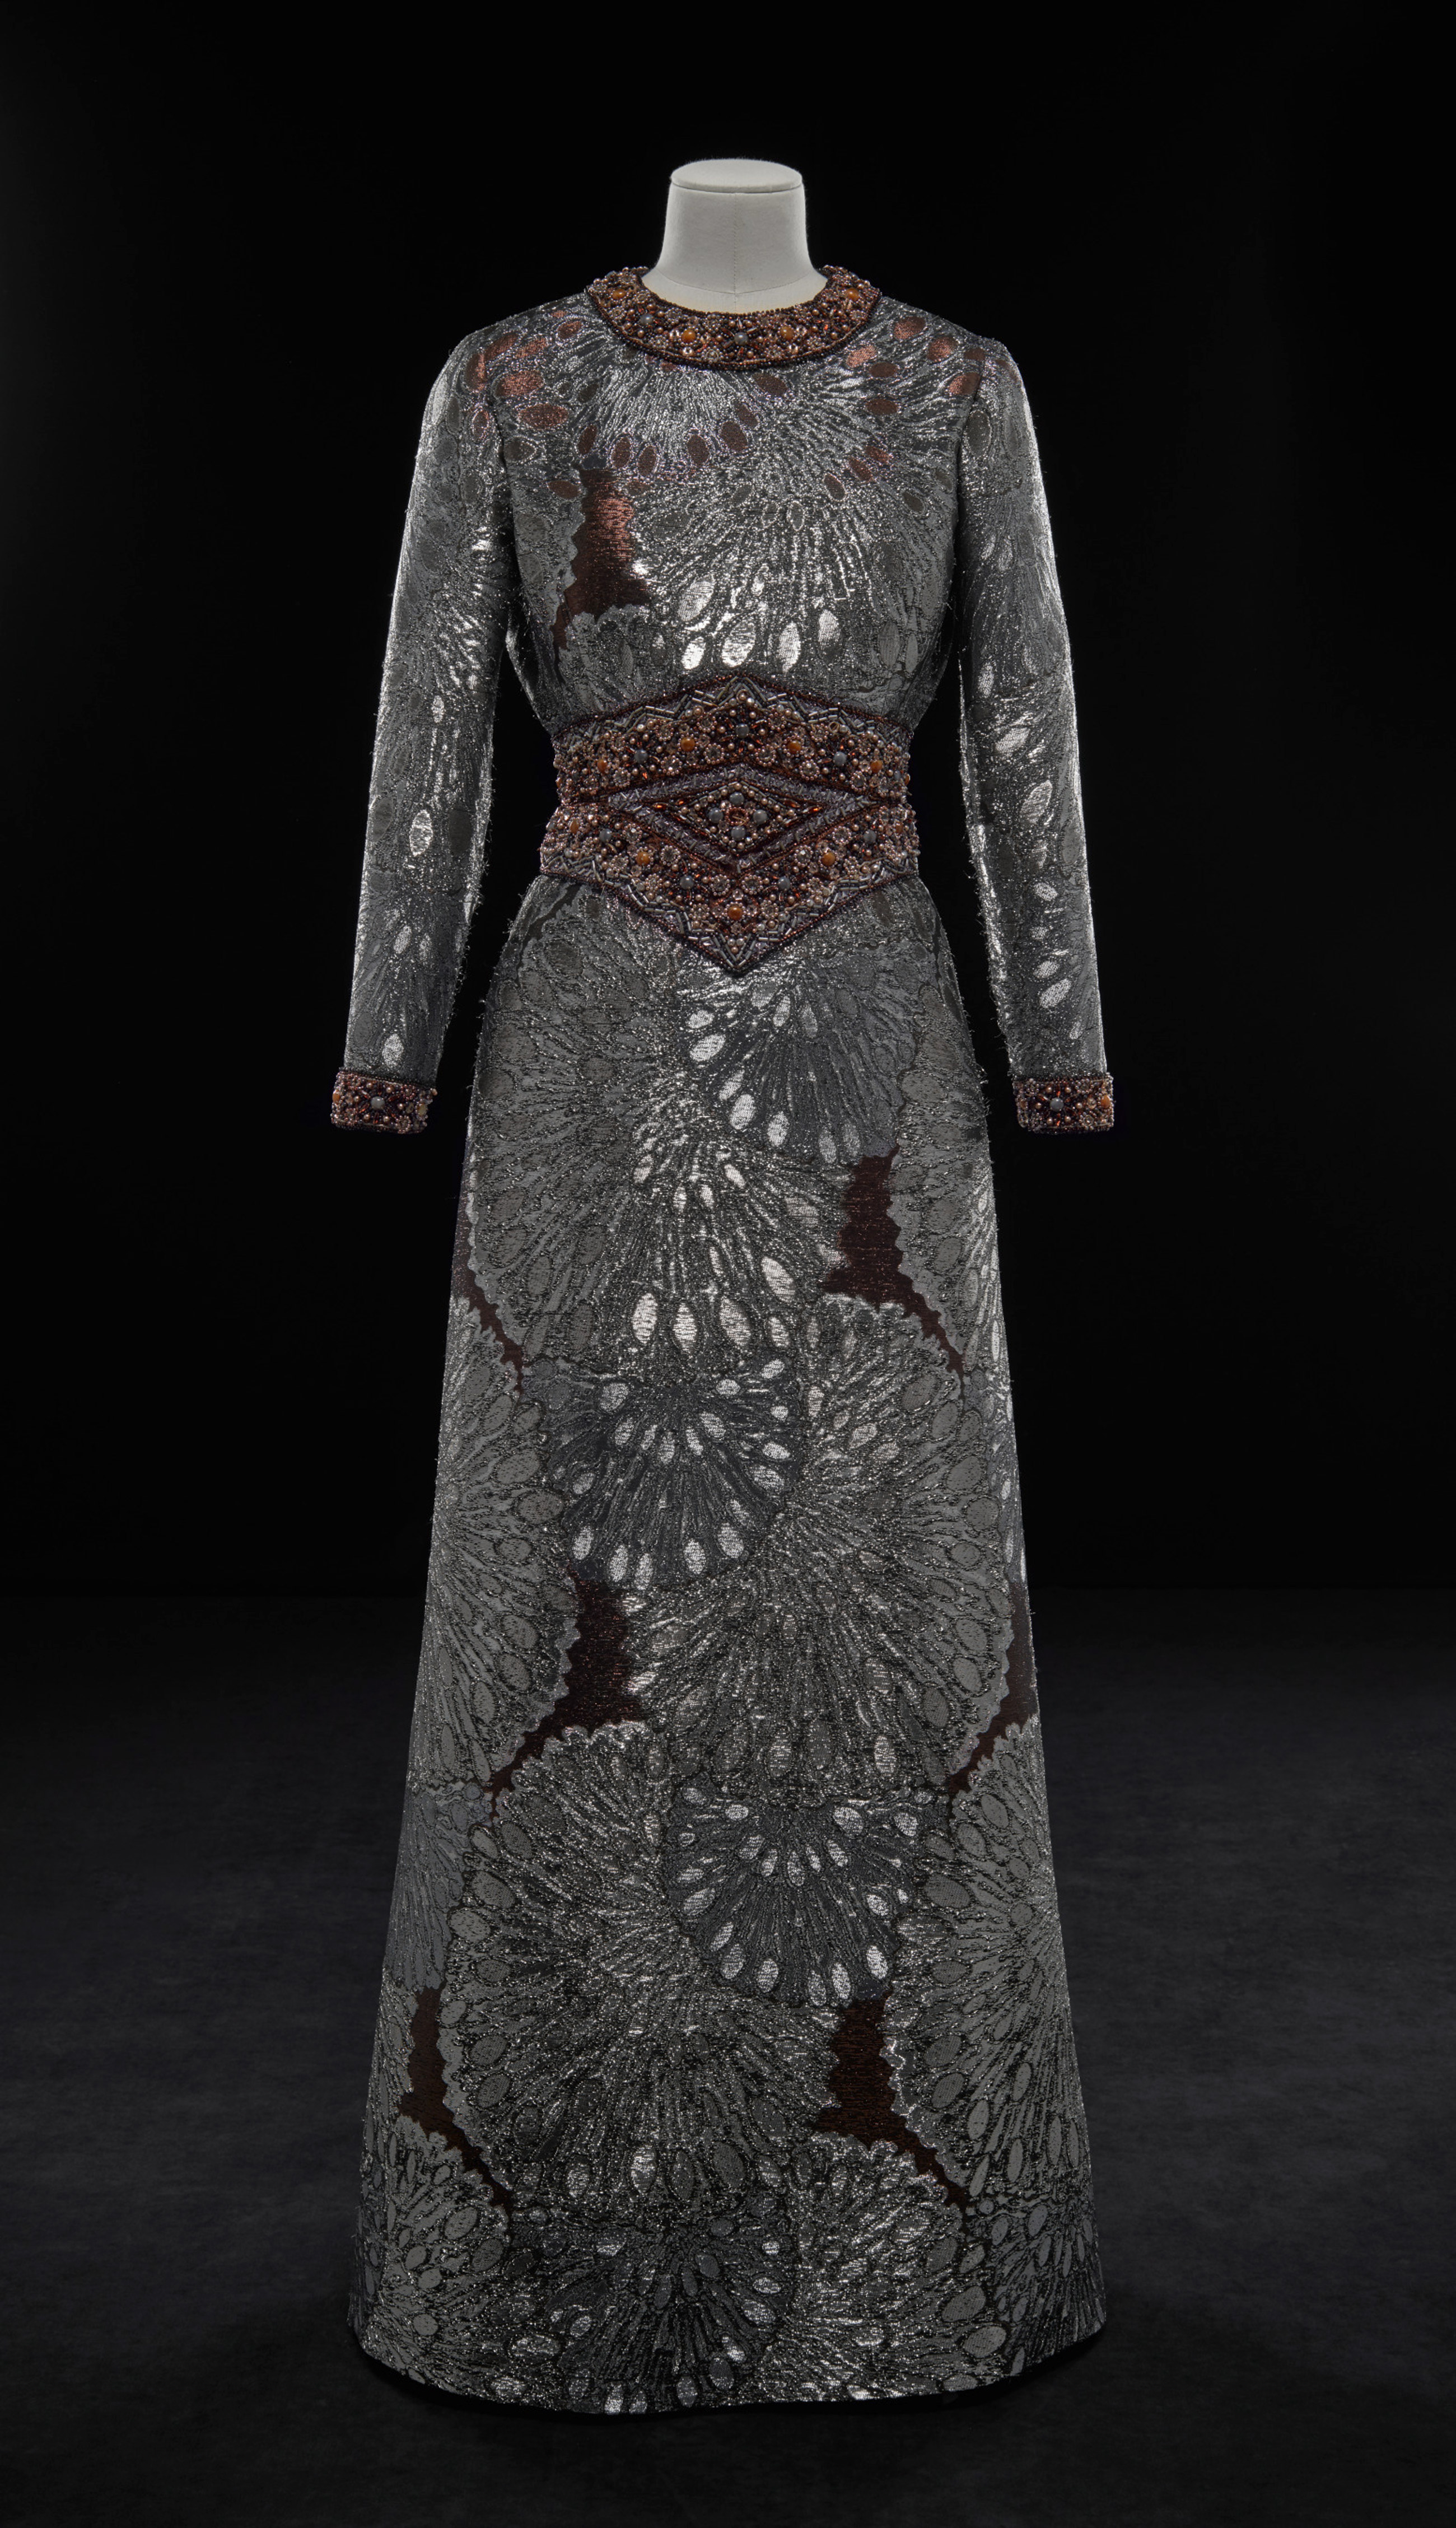 Museum at FIT - Dress of the Day: Nicolas Ghesquière for